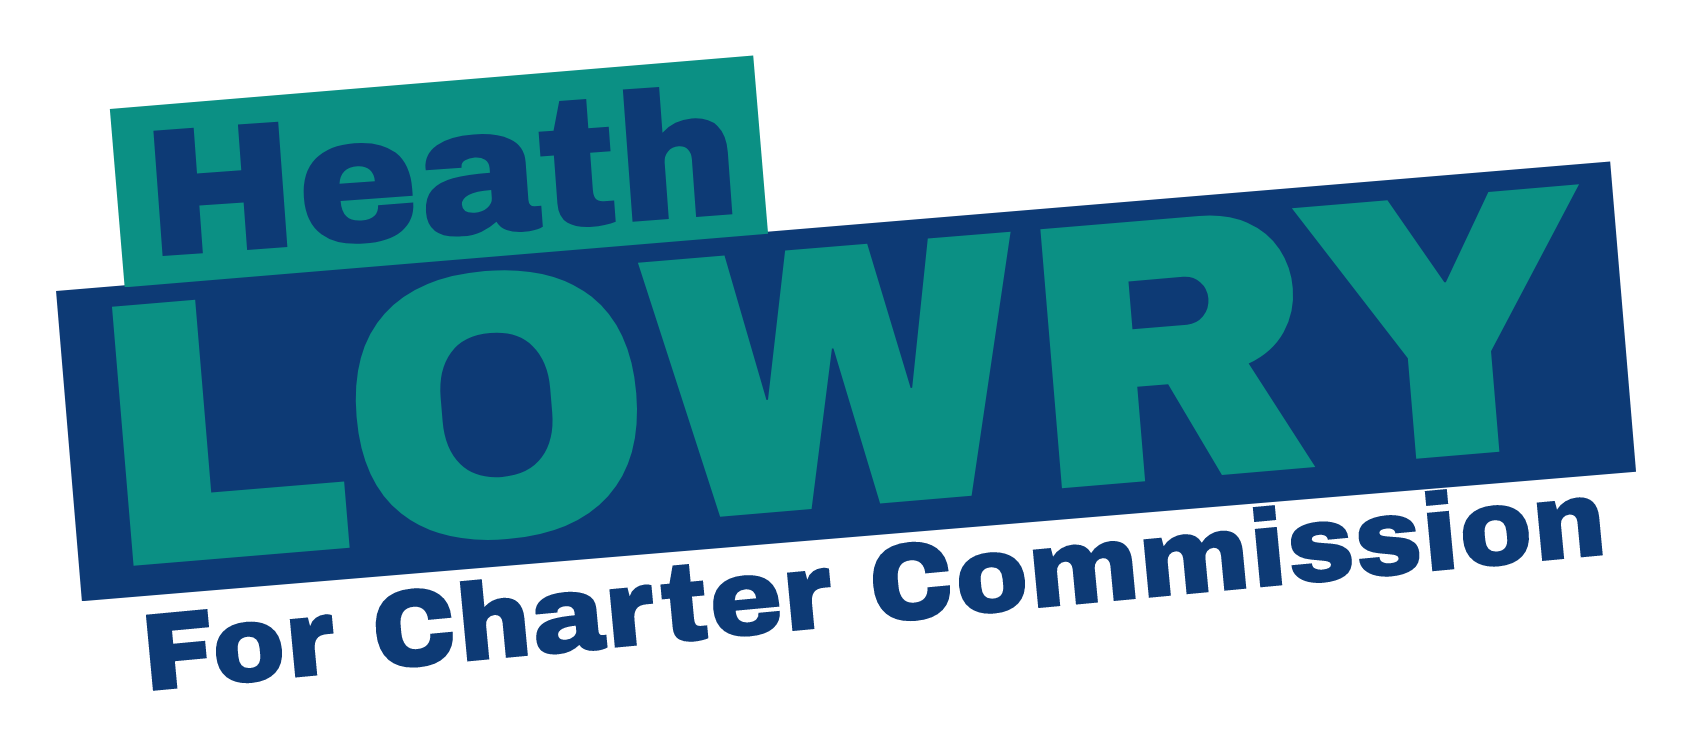 Logo stating: Heath Lowry For Charter Commission